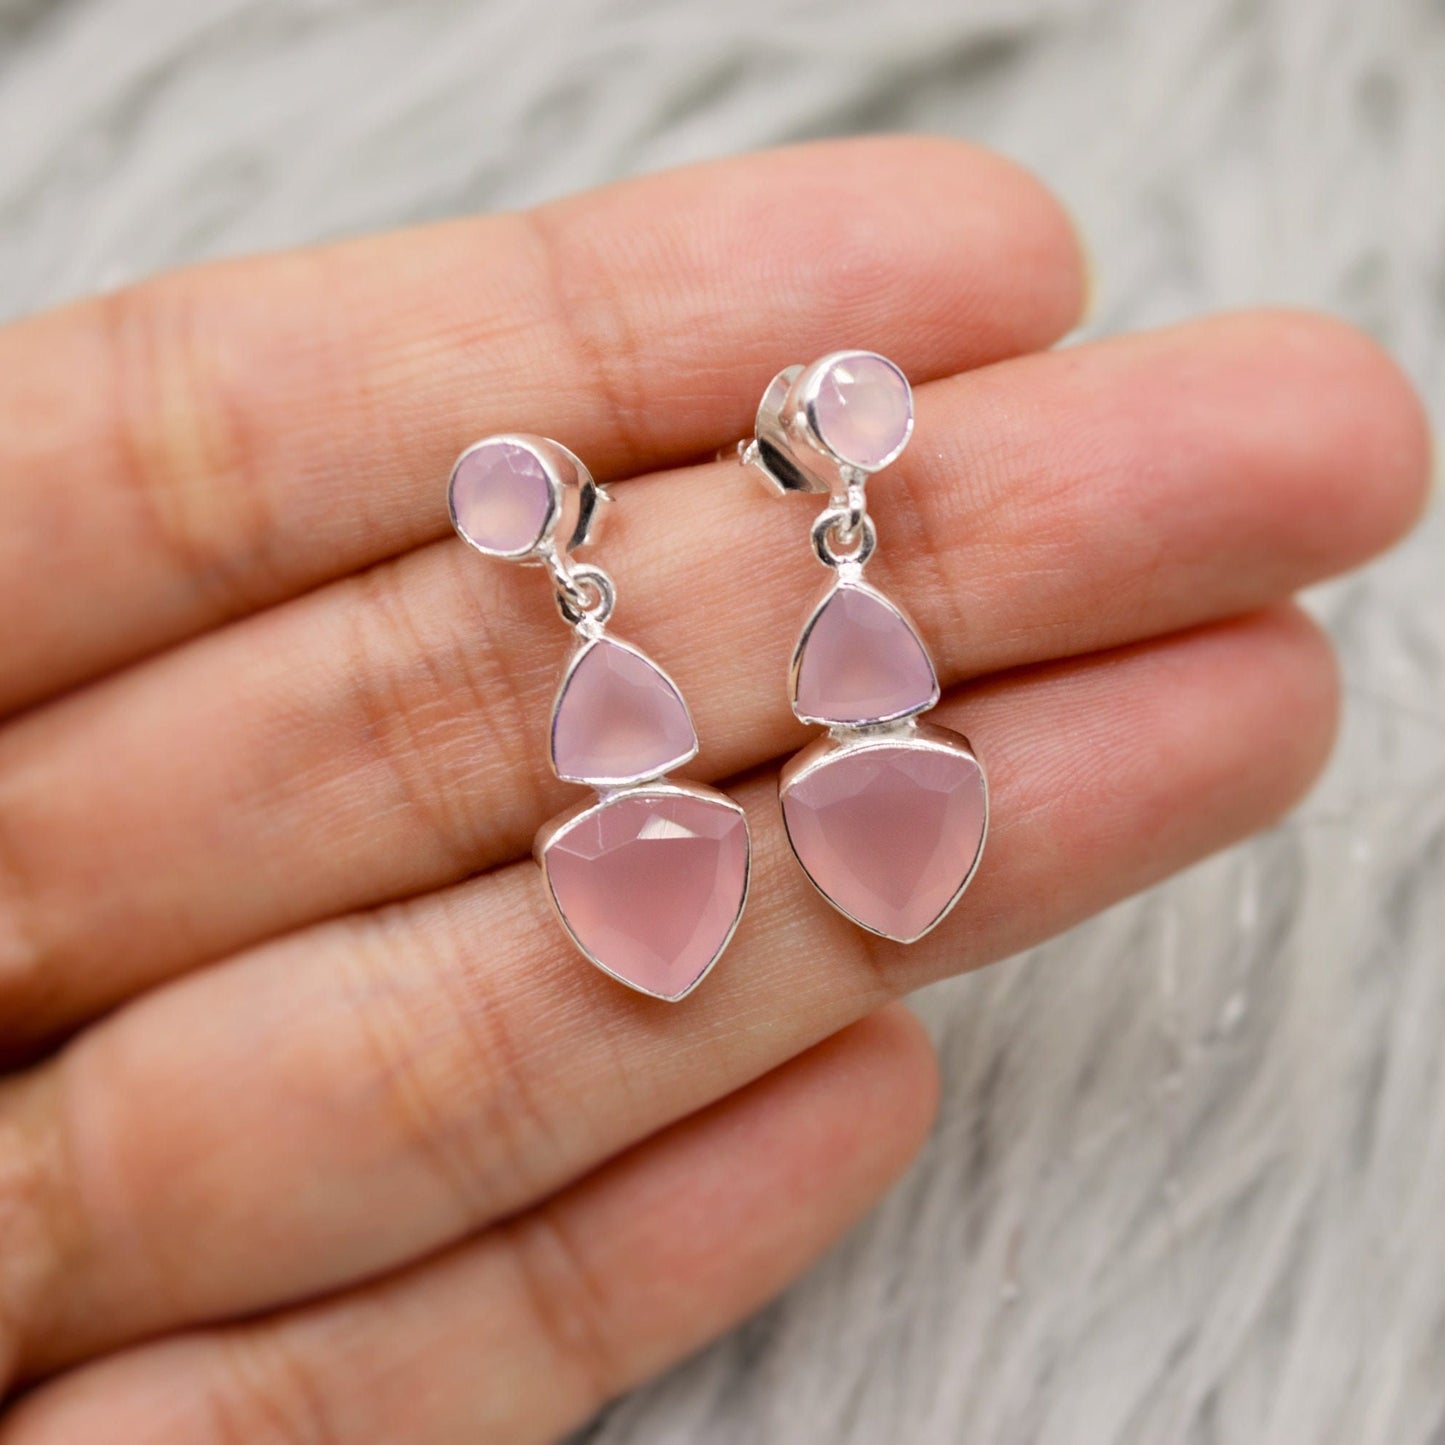 Rose Chalcedony Sterling Silver Drop Earrings, Pink Gemstone Earrings, Unique Statement Earrings, Gifts For Her